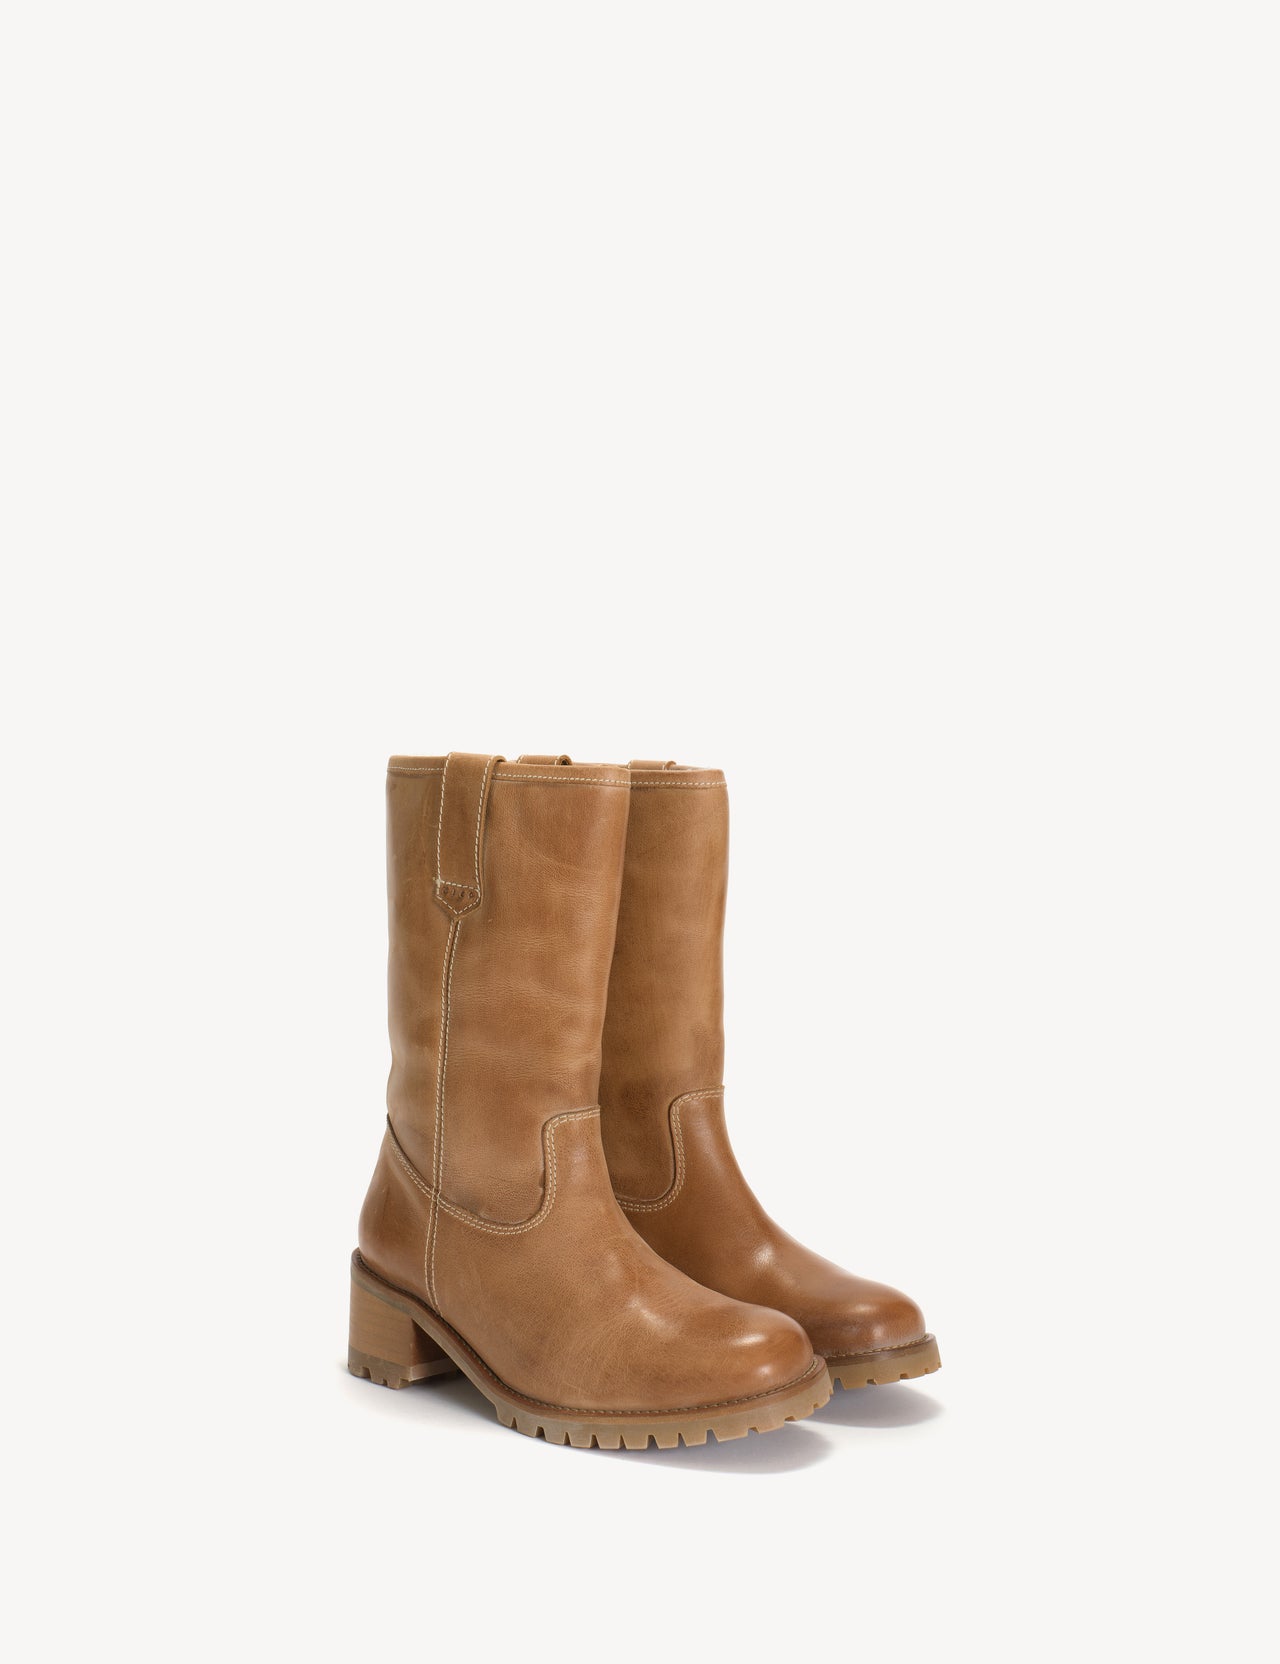 Kimmi Boot In Dark Tan Escovado Leather with 50mm heel